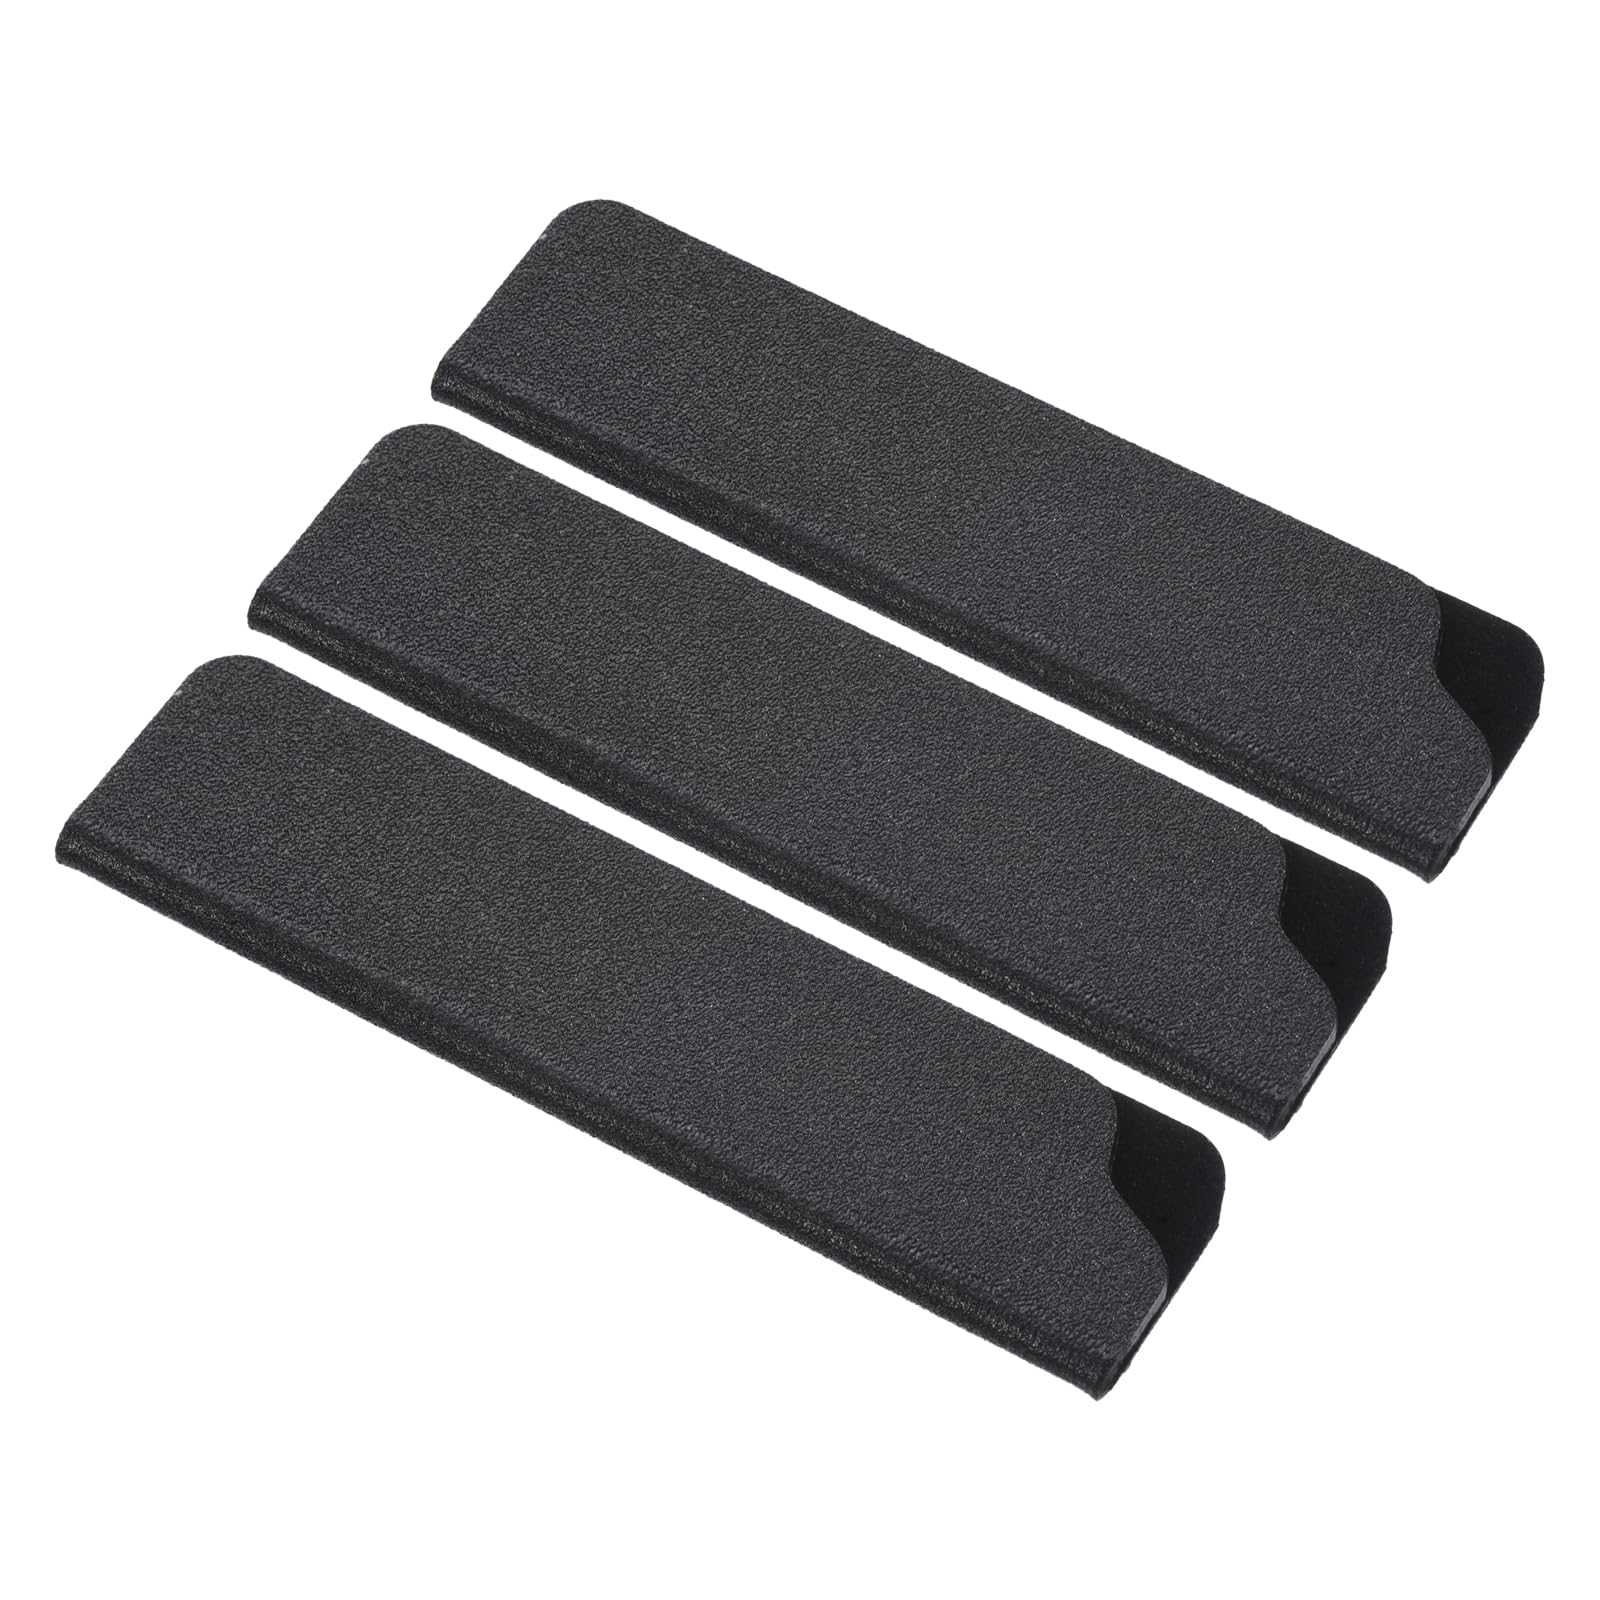 PATIKIL ABS Knife Cover Sleeves for 3.5" Paring Knife, 3 Pack Knives Edge Guard Blade Protector Universal Knife Sheath for Home Kitchen, Black